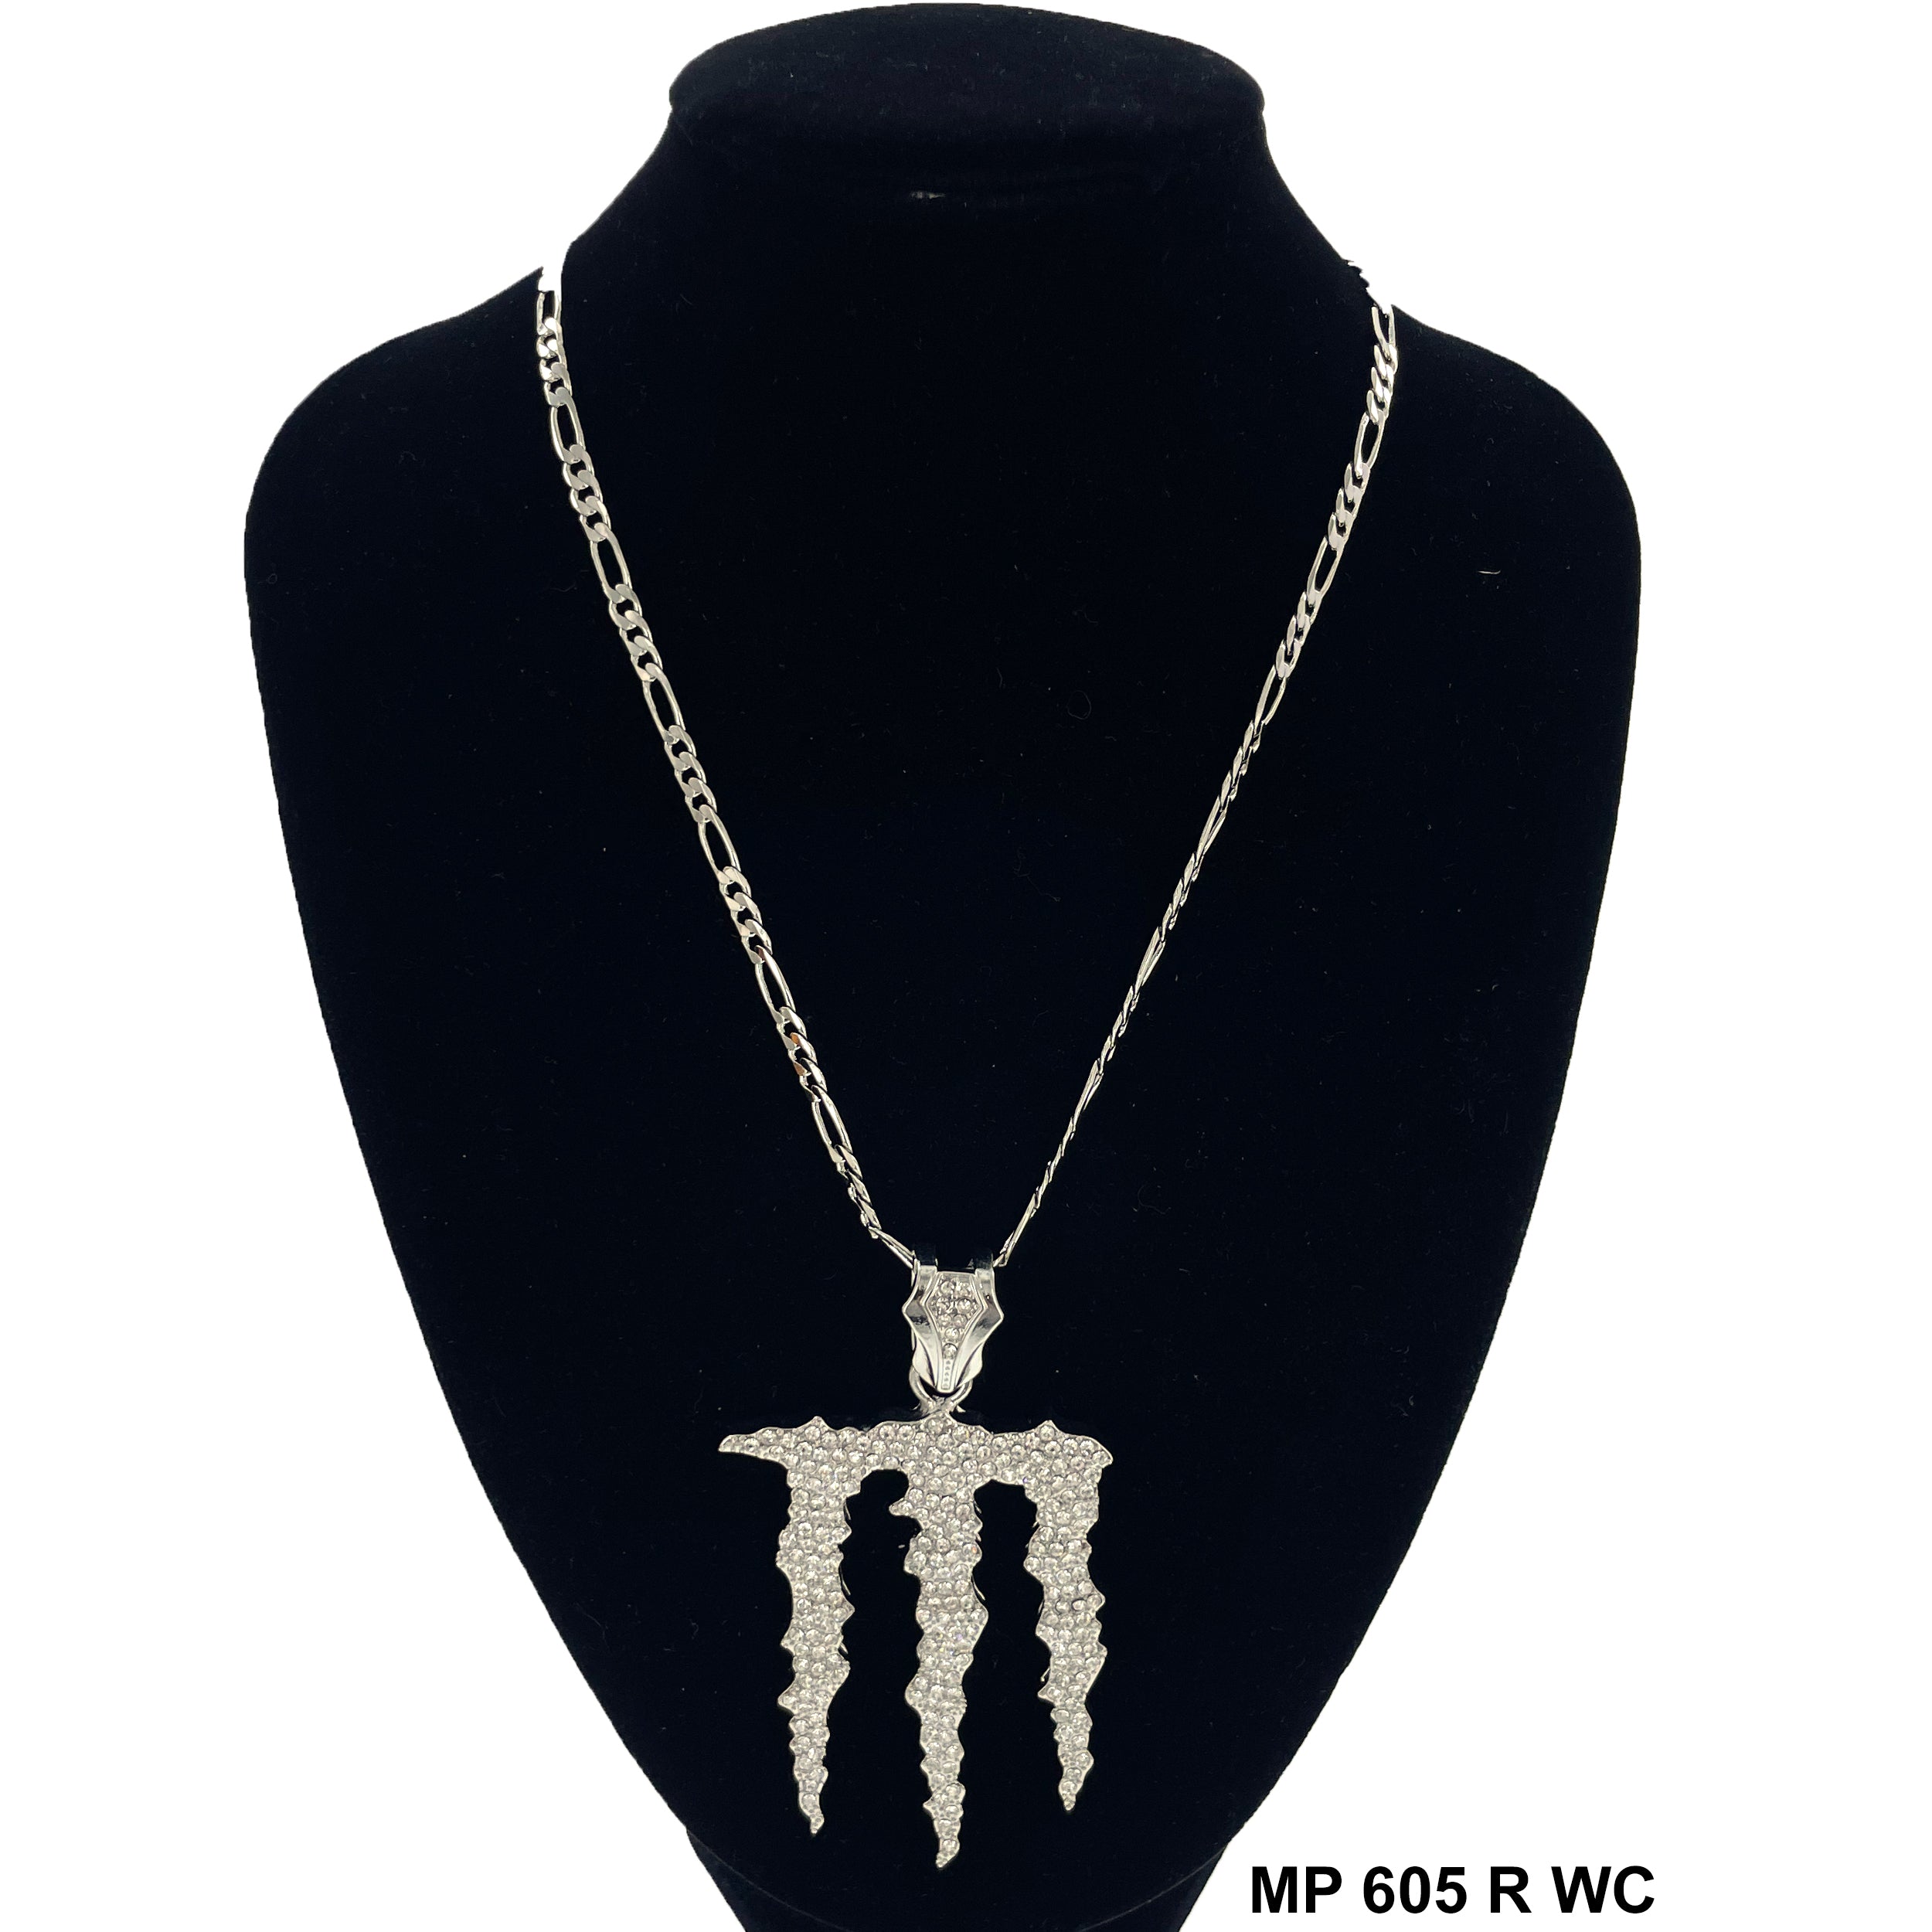 Monster Pendant With Chain MP 605 R WC